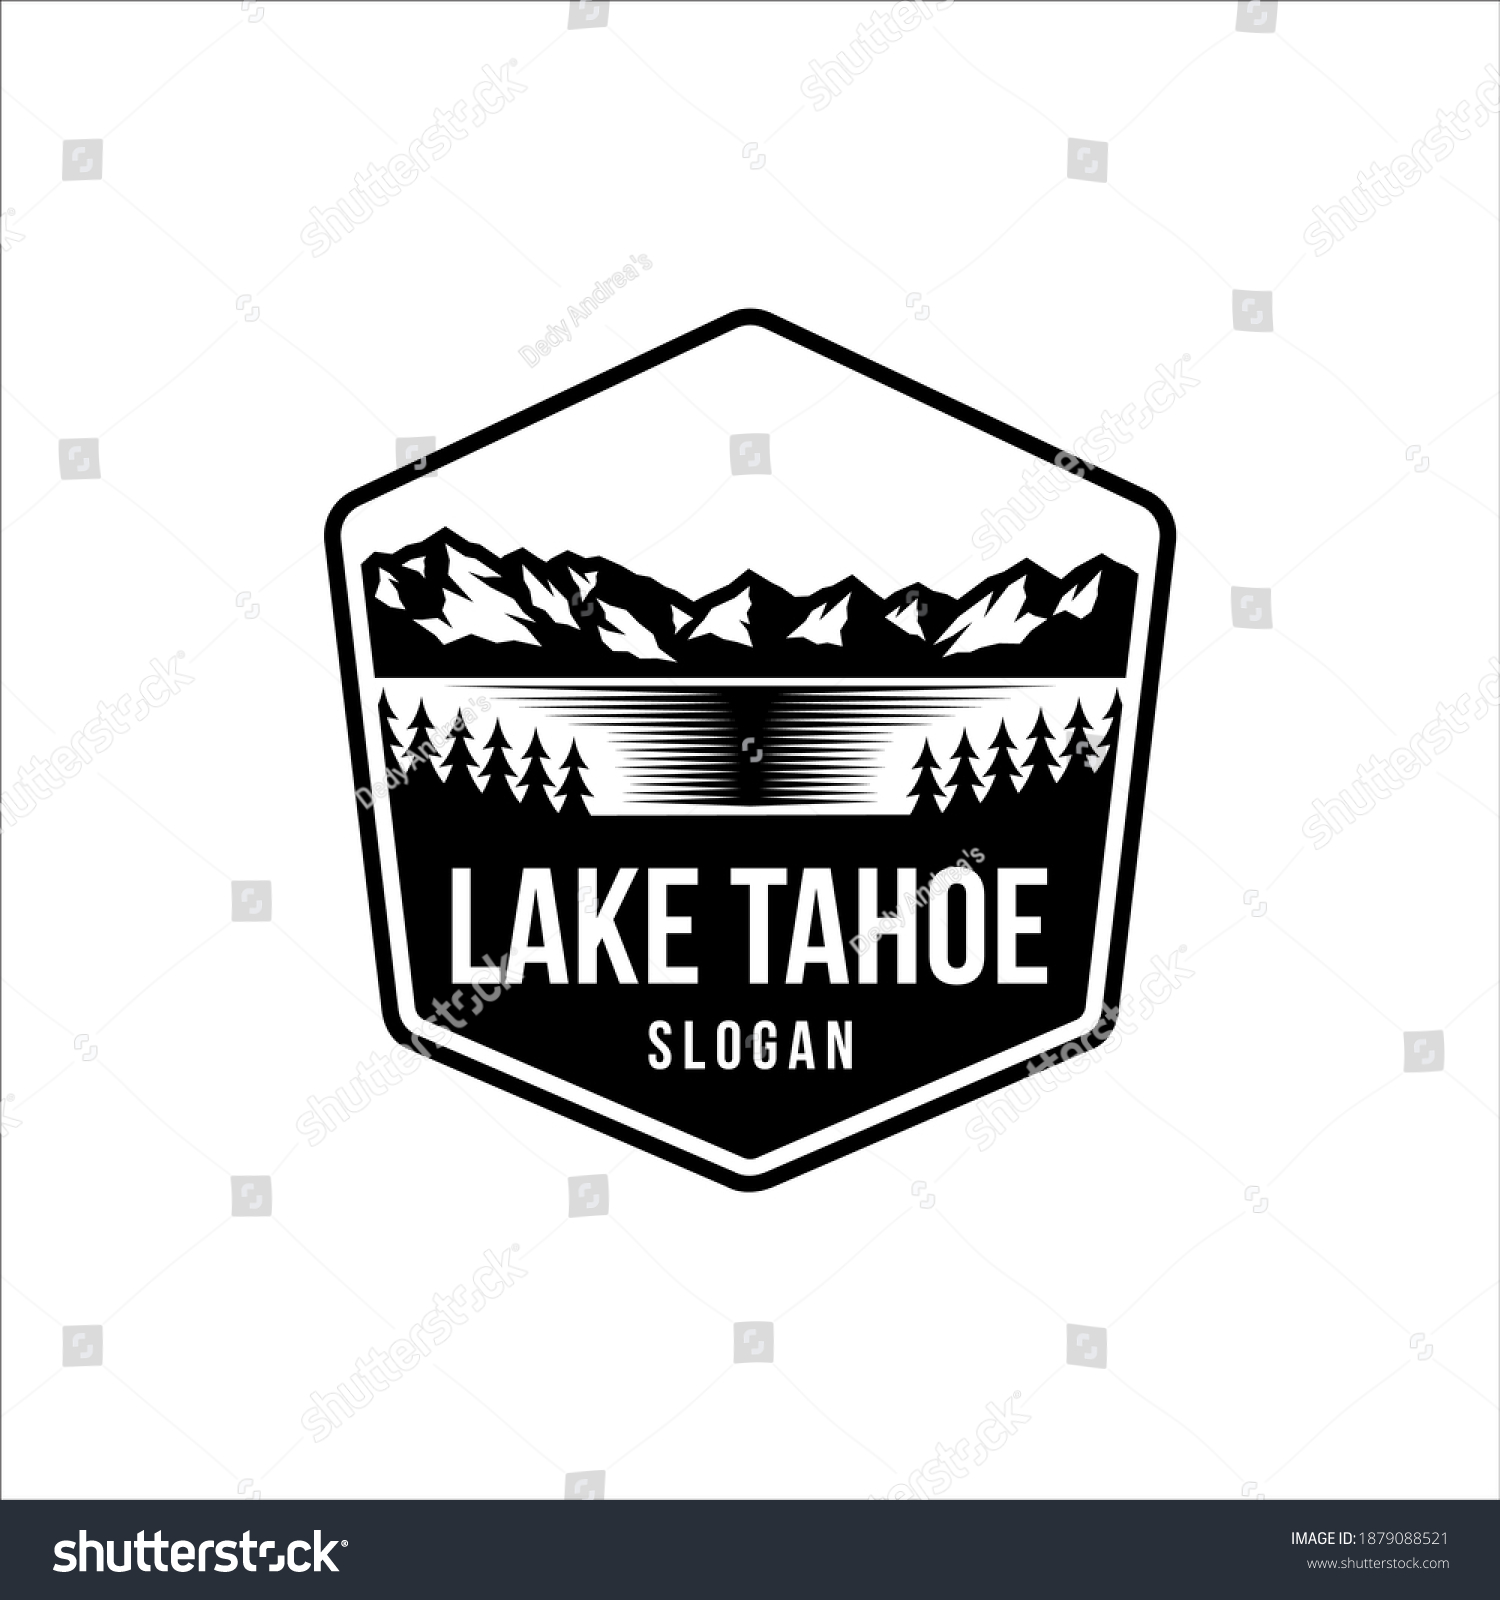 SVG of Lake Tahoe with retro designs and badges svg